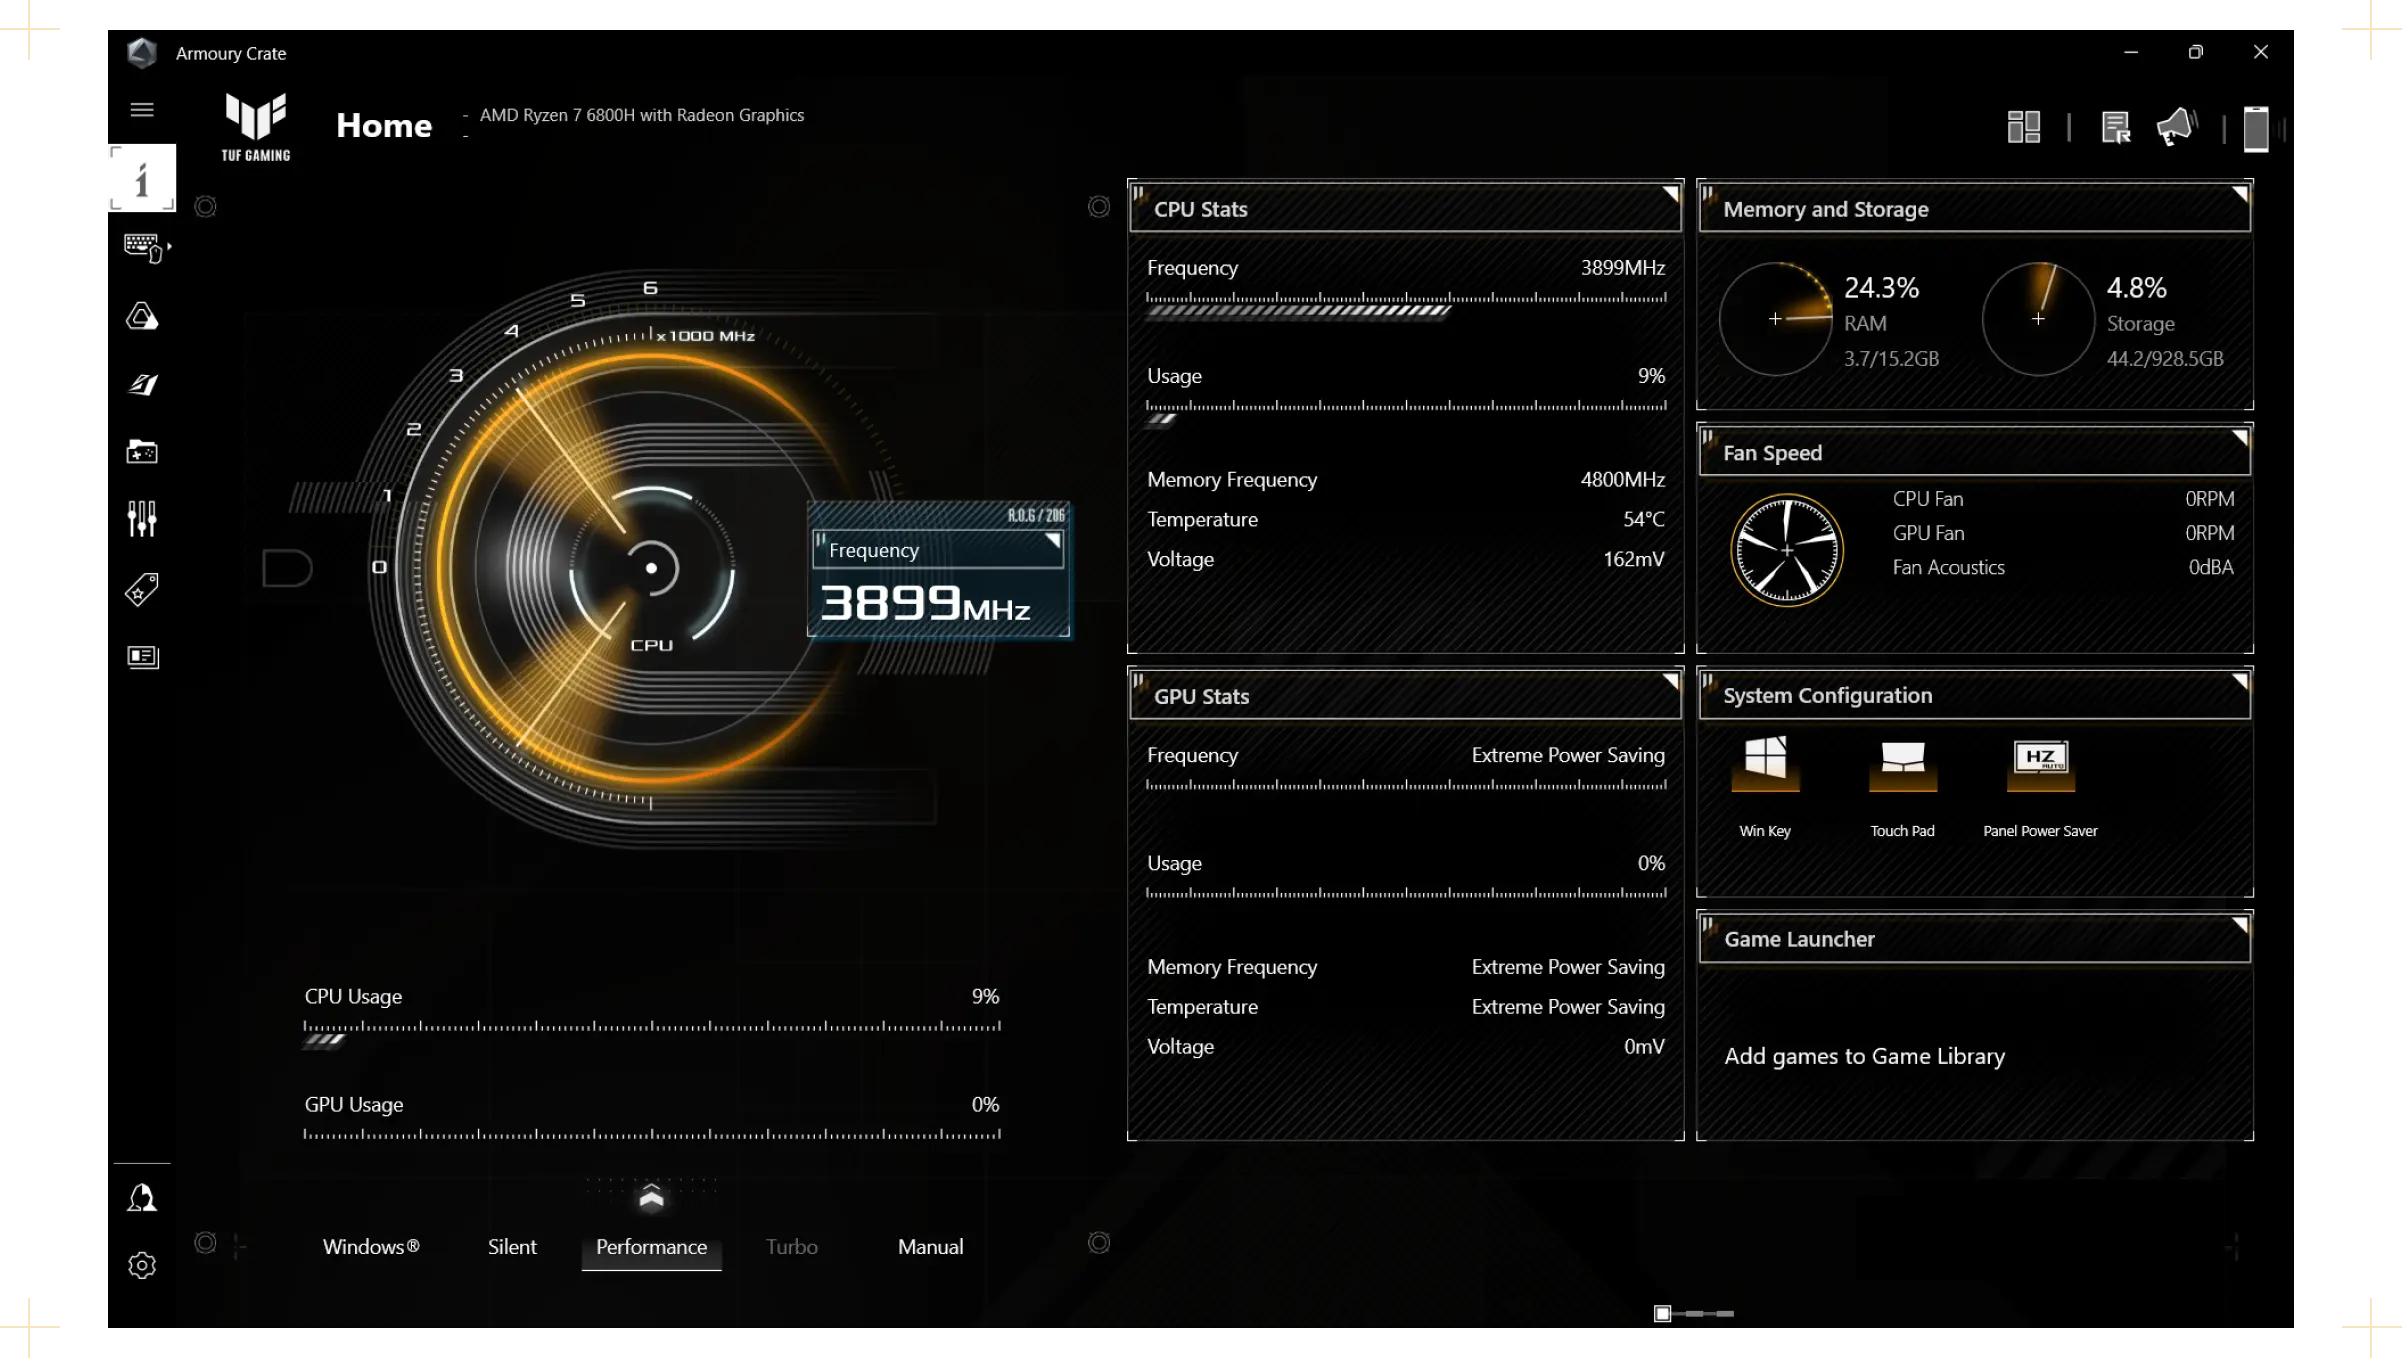 A screenshot of TUF’s Armoury Crate software showing system status and toggle-able functions.